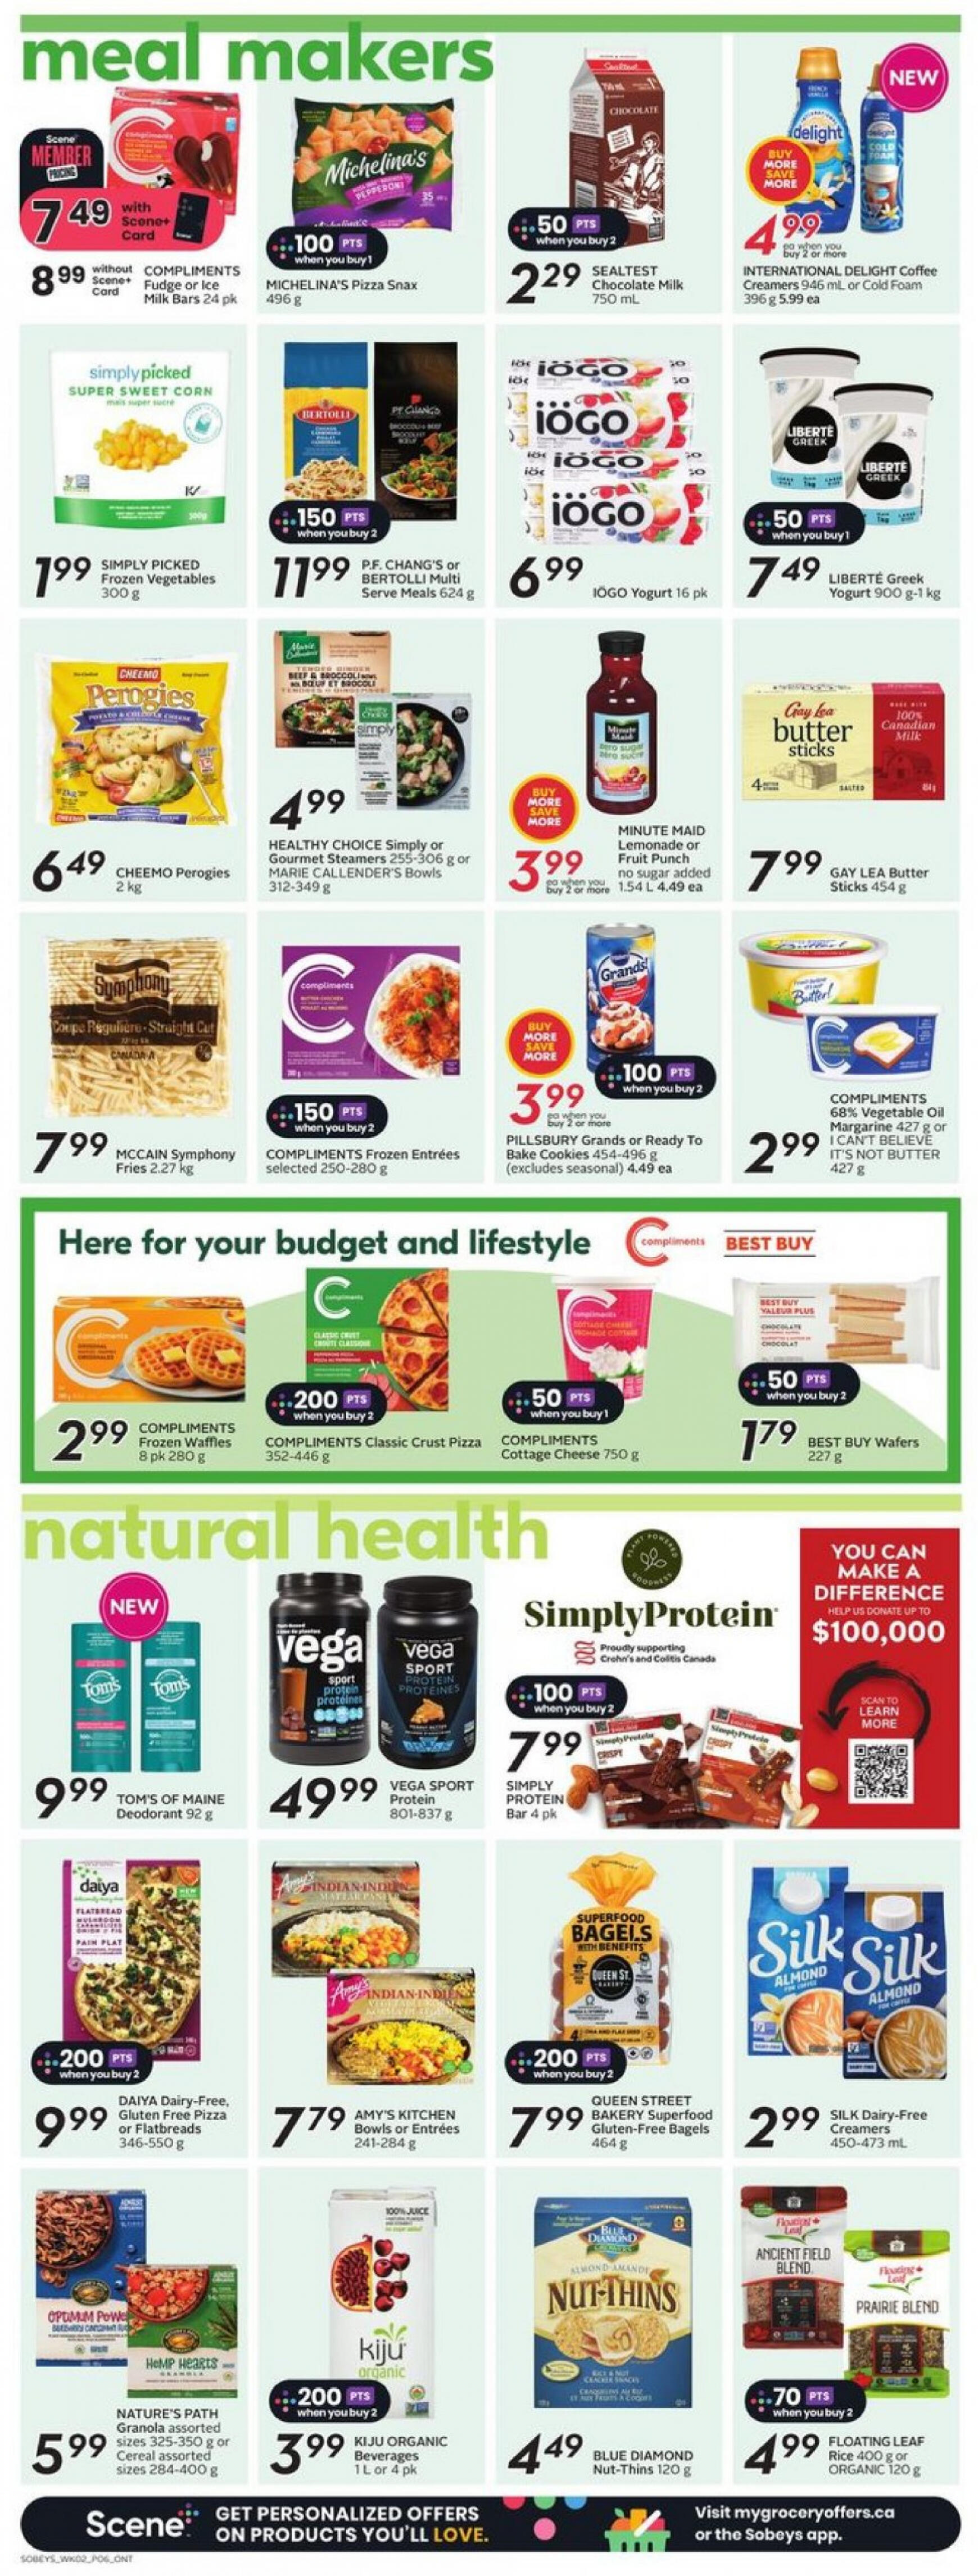 sobeys - Sobeys - Weekly Flyer - Ontario flyer current 09.05. - 15.05. - page: 11